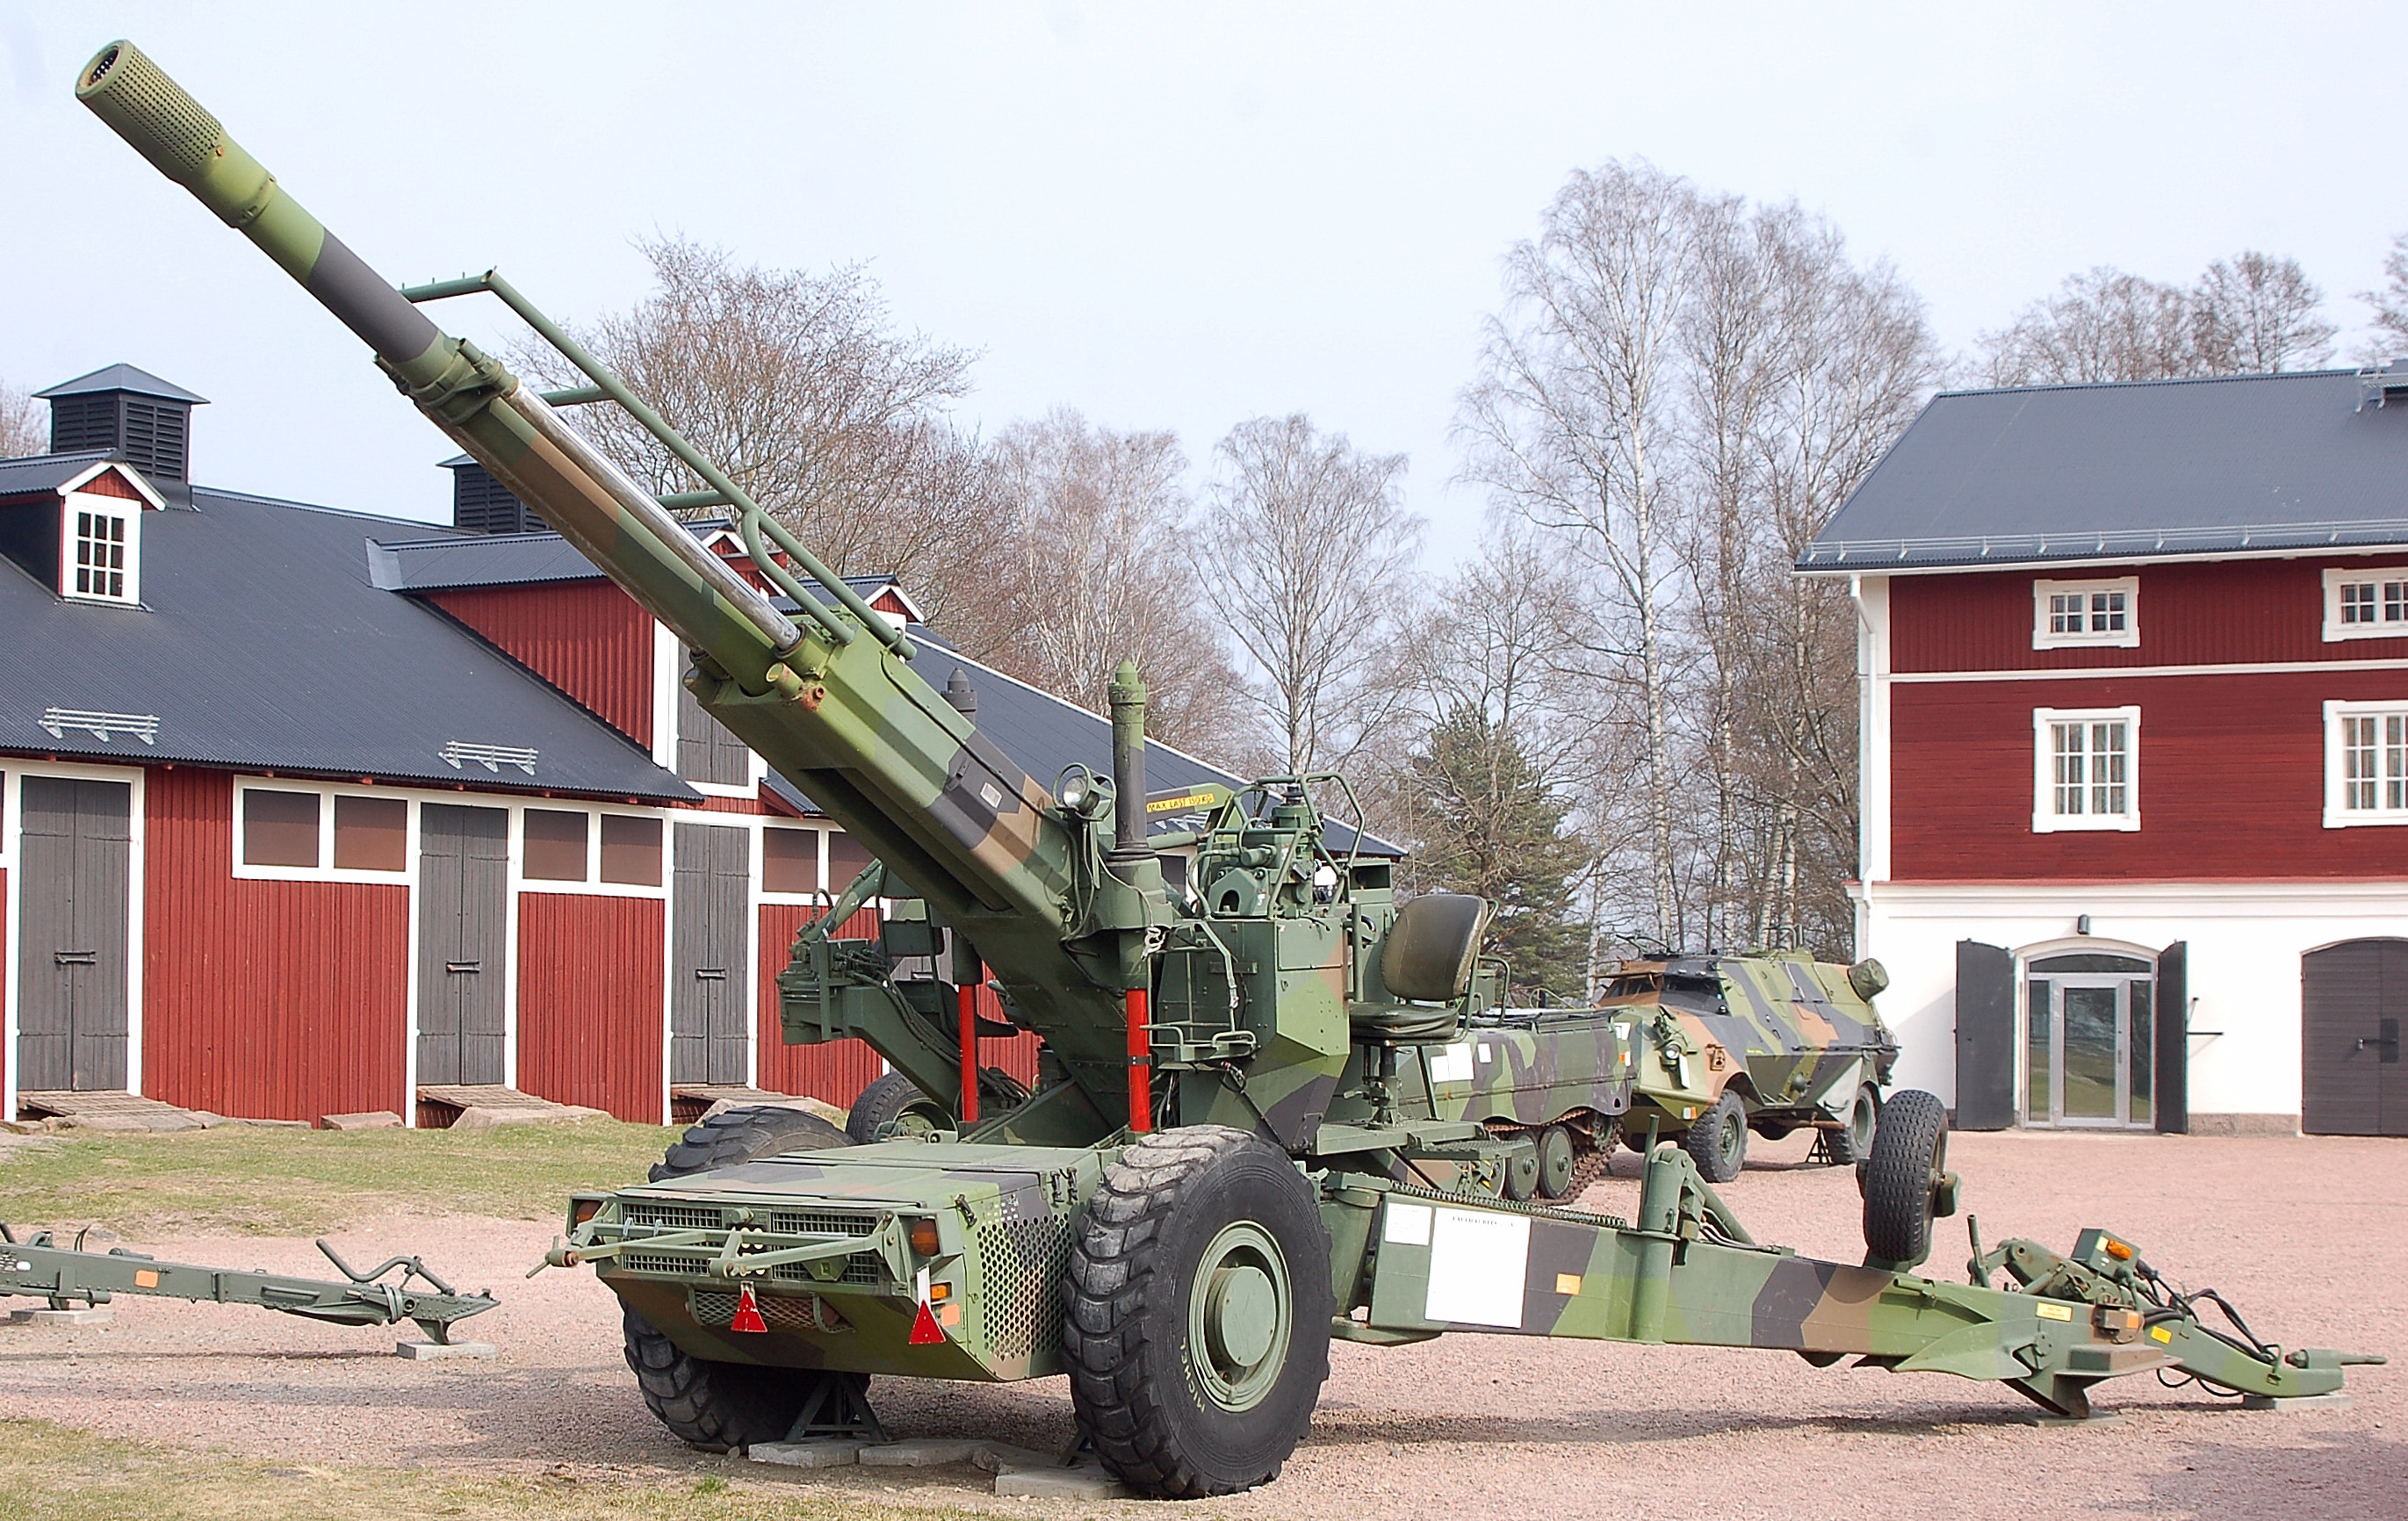 This is the latest BAE System's M777A2 Ultra Light Towed-Howitzer; equivalent of the Bofors FH77B. The M777A2 is manufactured by BAE in the United States now. It is an ULTRA-LIGHT towed howitzer of the same caliber; that can be airdropped for Airborne missions. India wants to buy 200 of these ultra-light howitzers from the United States immediately, for the Army Mountain-Divisions